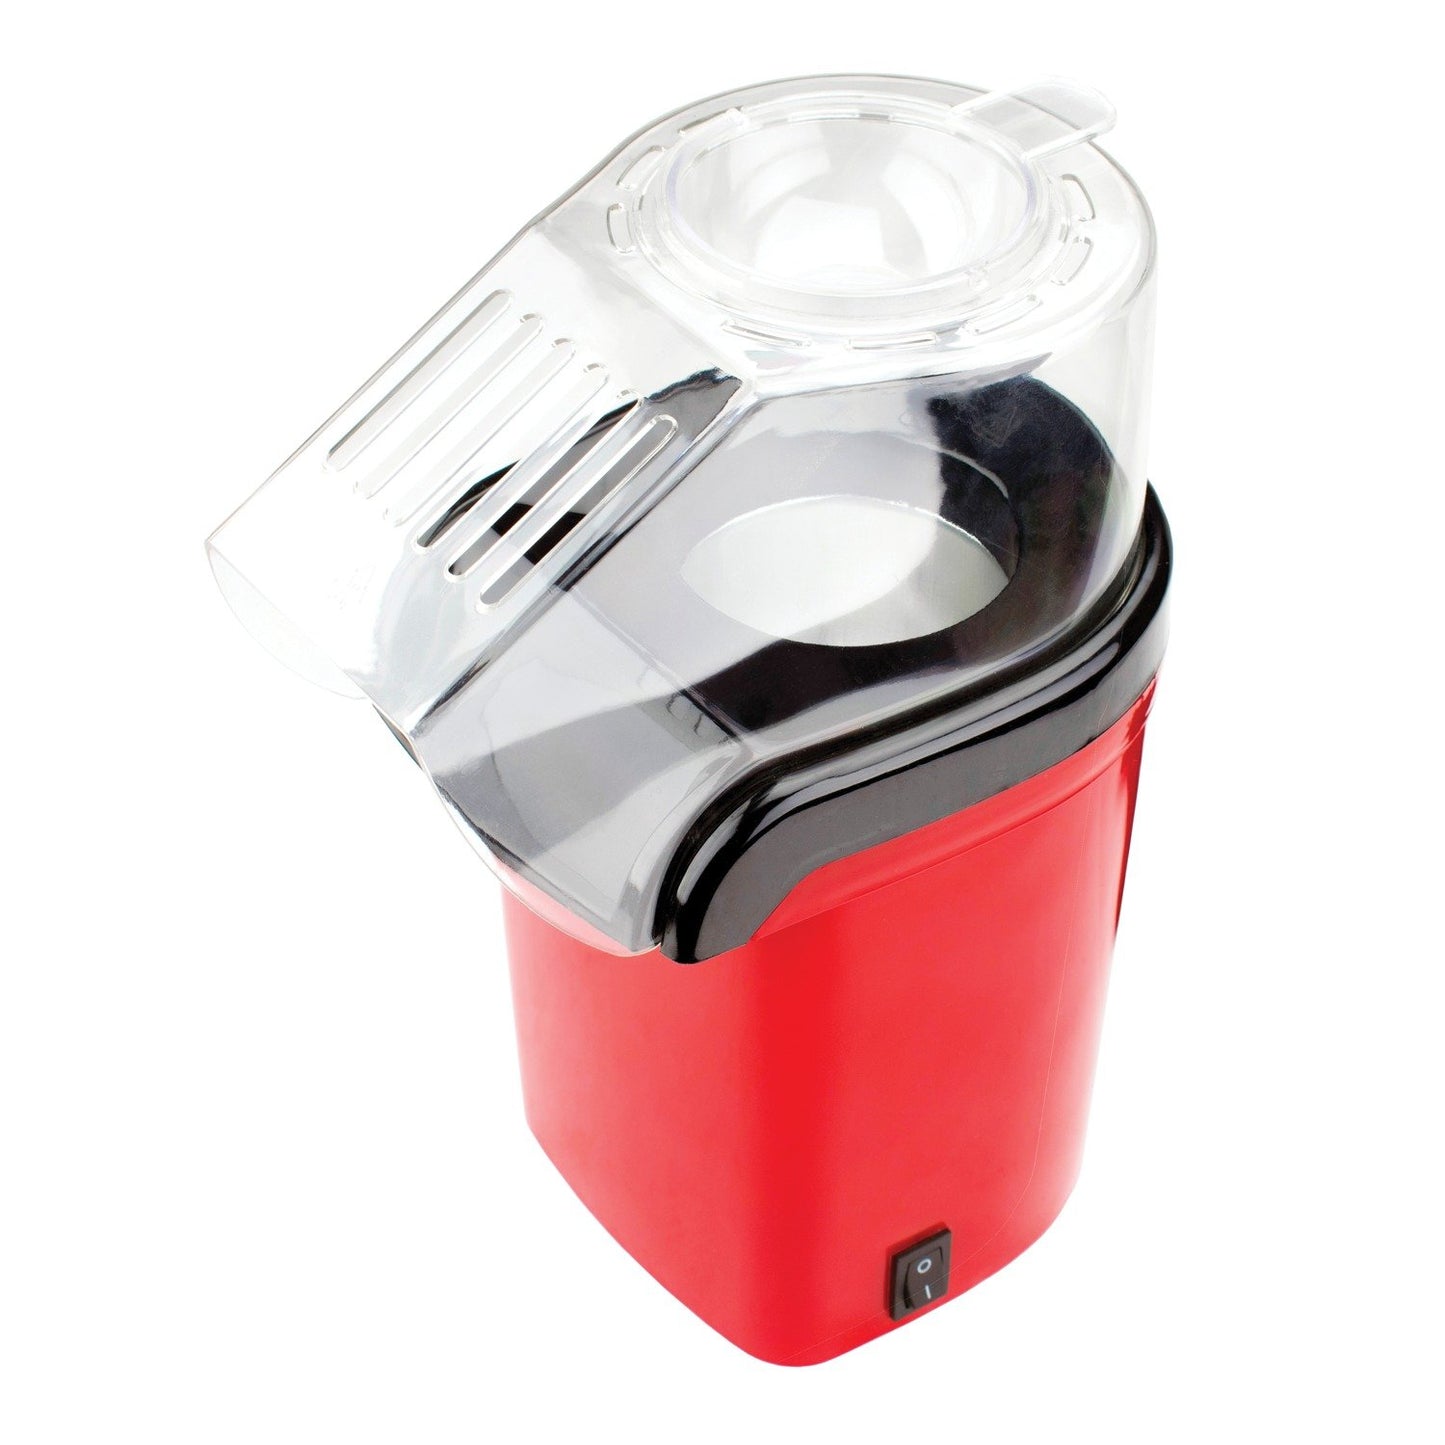 Brentwood Appl. PC-486R 8-Cup Hot Air Popcorn Maker (Red)